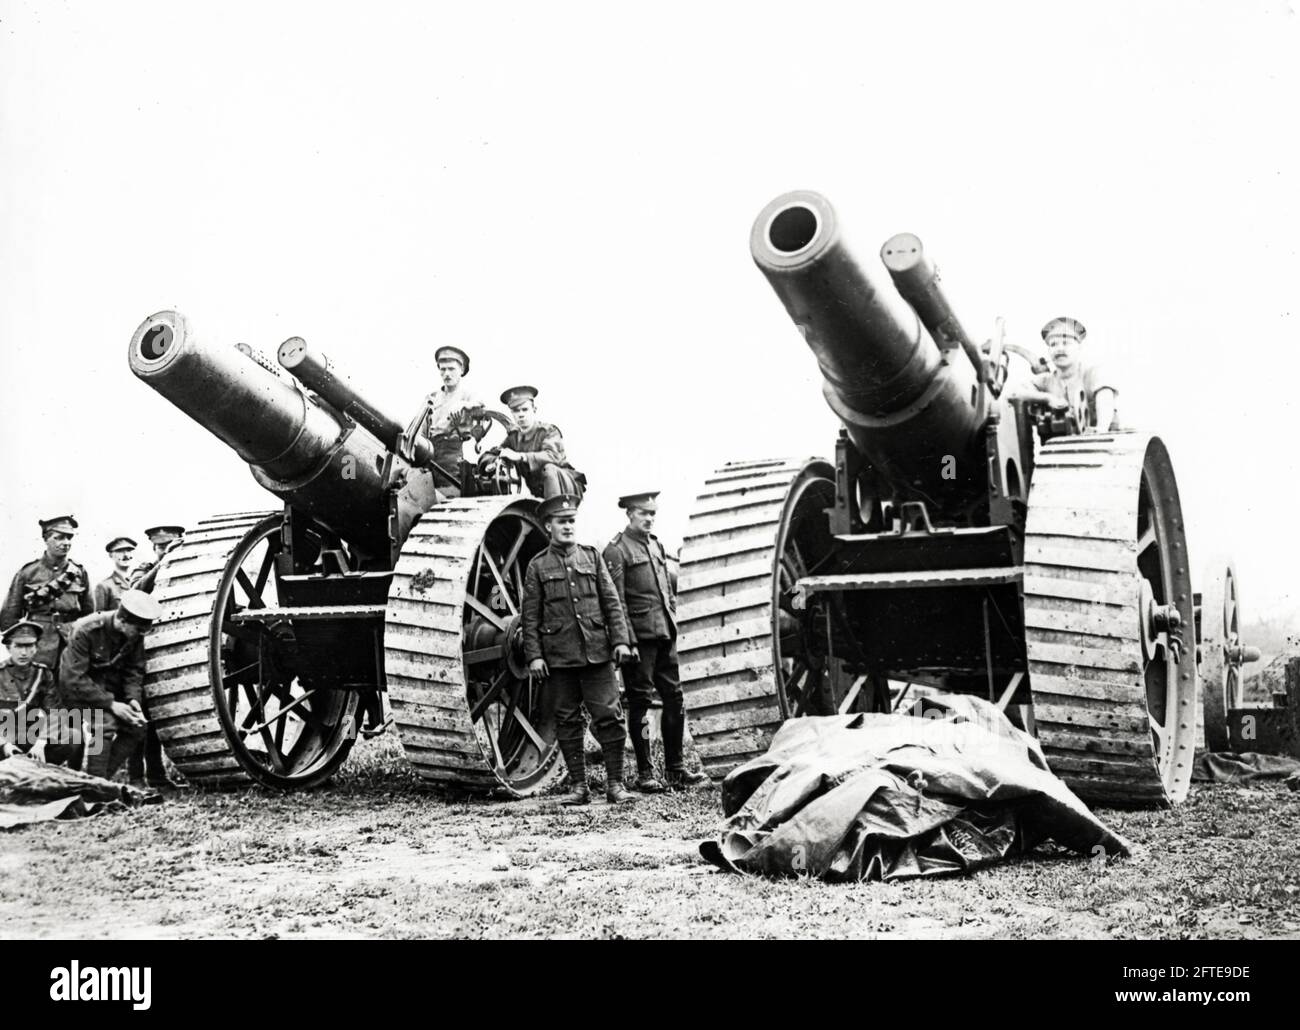 World War One, WWI, Western Front - Two gigantic guns used on German troops, France, artillery. Stock Photo